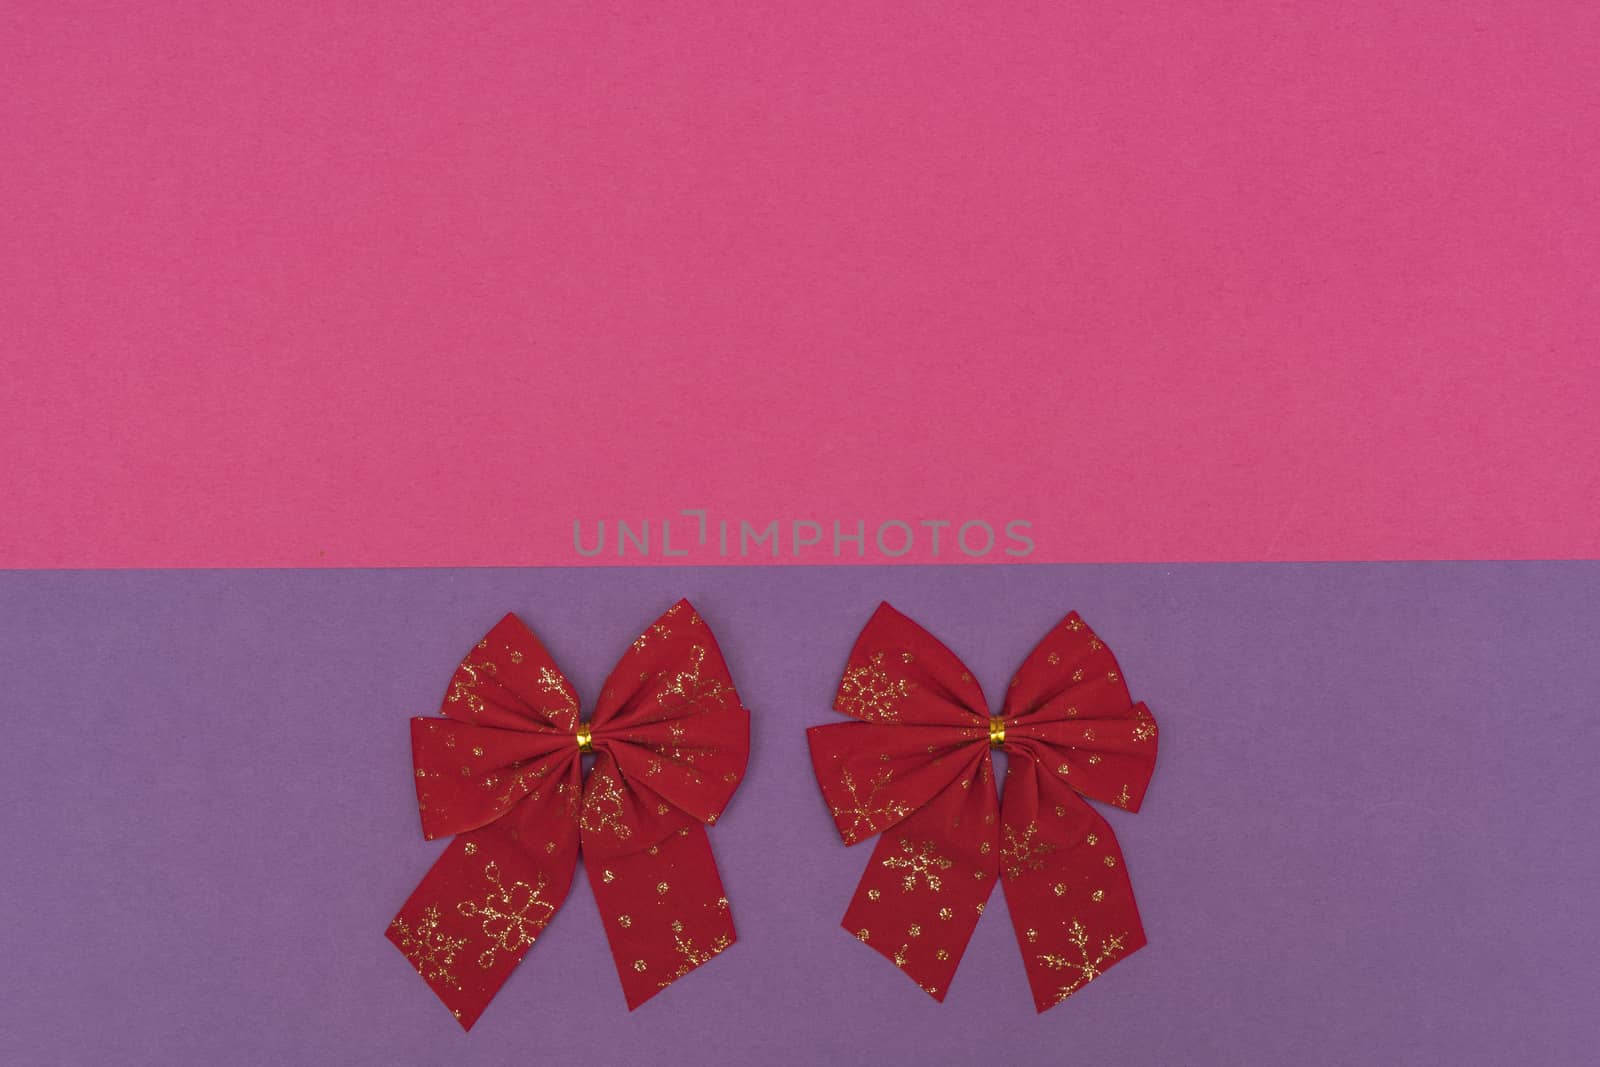 red Christmas bows on a colored background